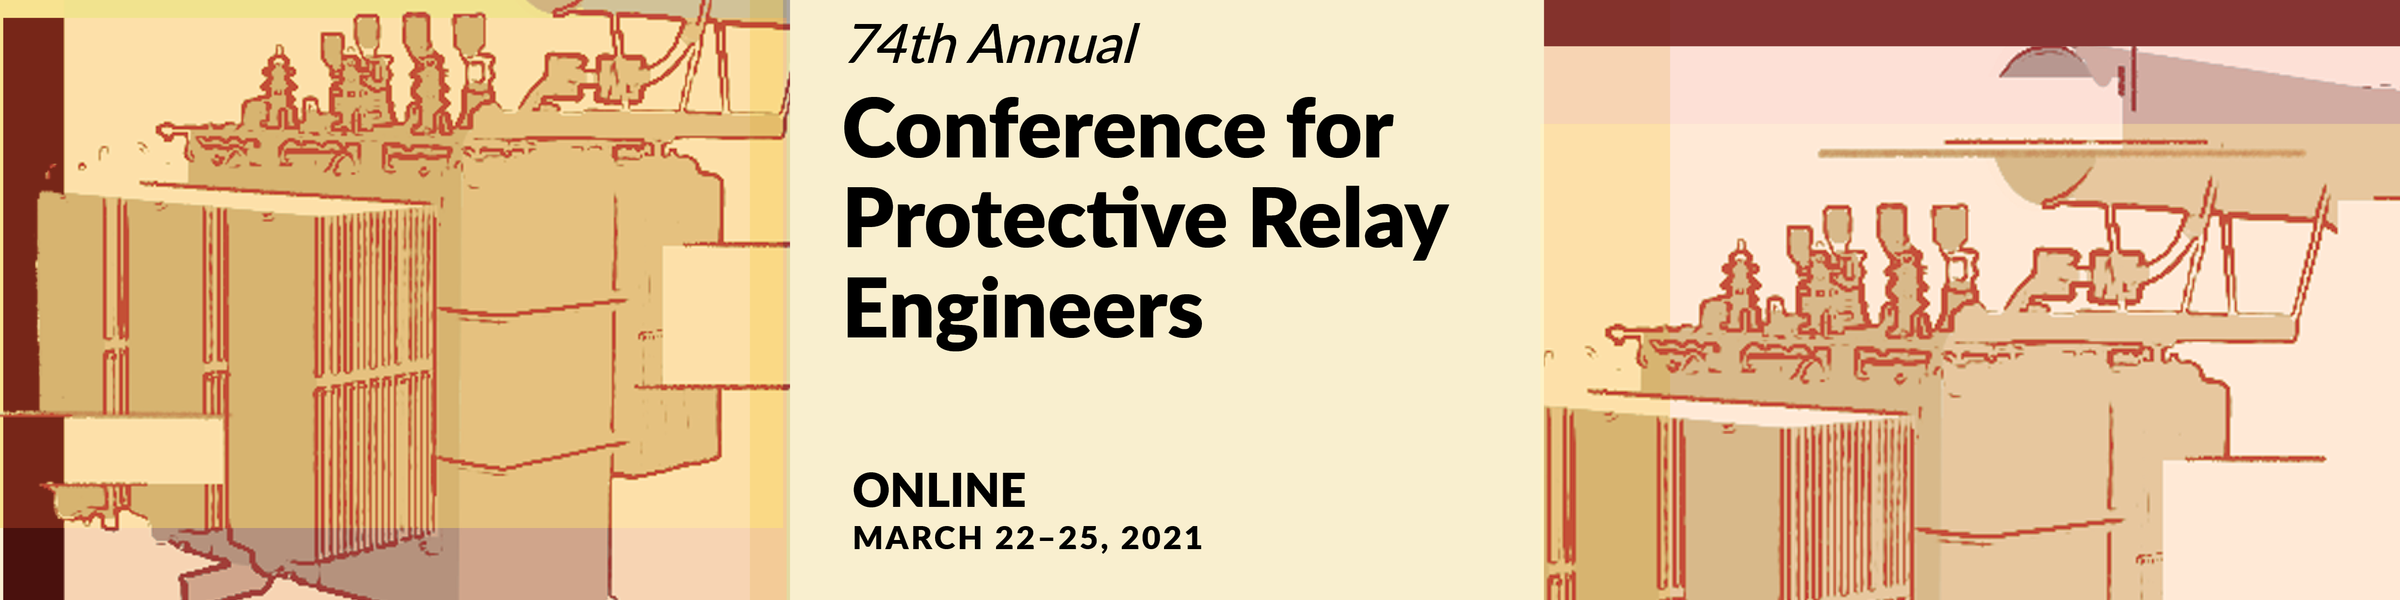 2020-2021 Relay Conference Exhibitor Reservation